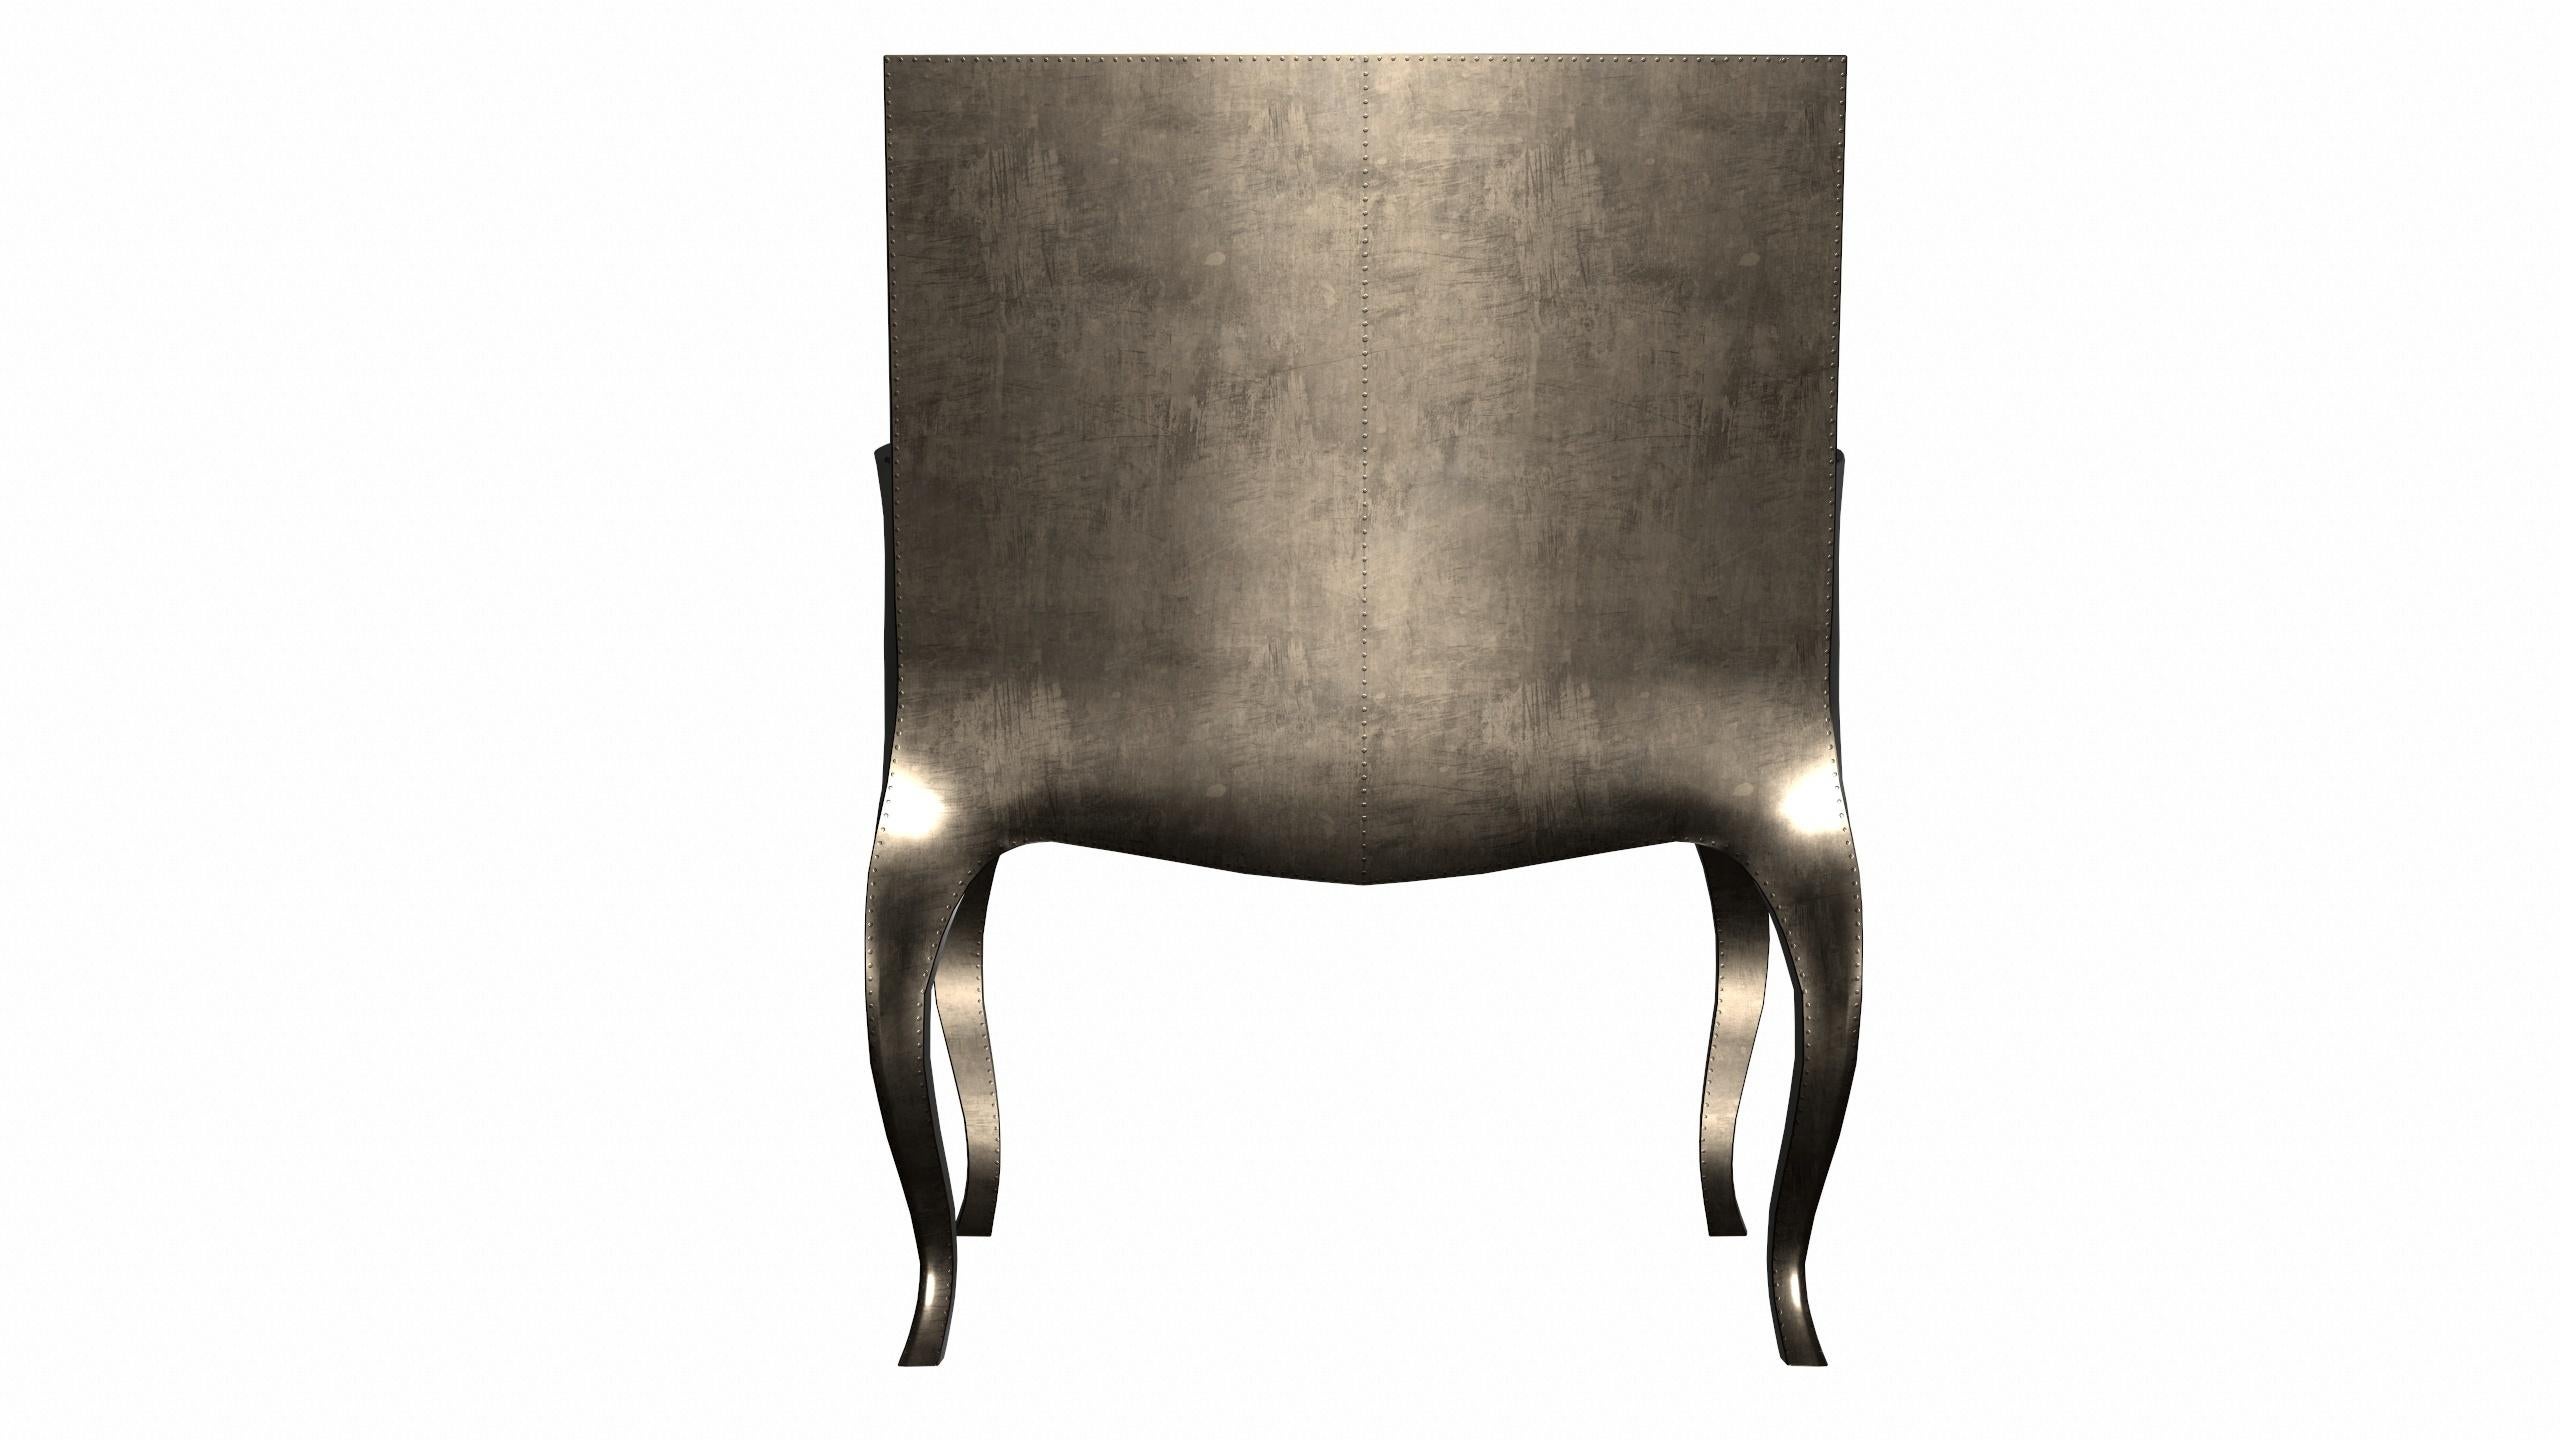 Hammered Art Deco Chairs in Smooth Antique Bronze by Paul Mathieu for S. Odegard For Sale